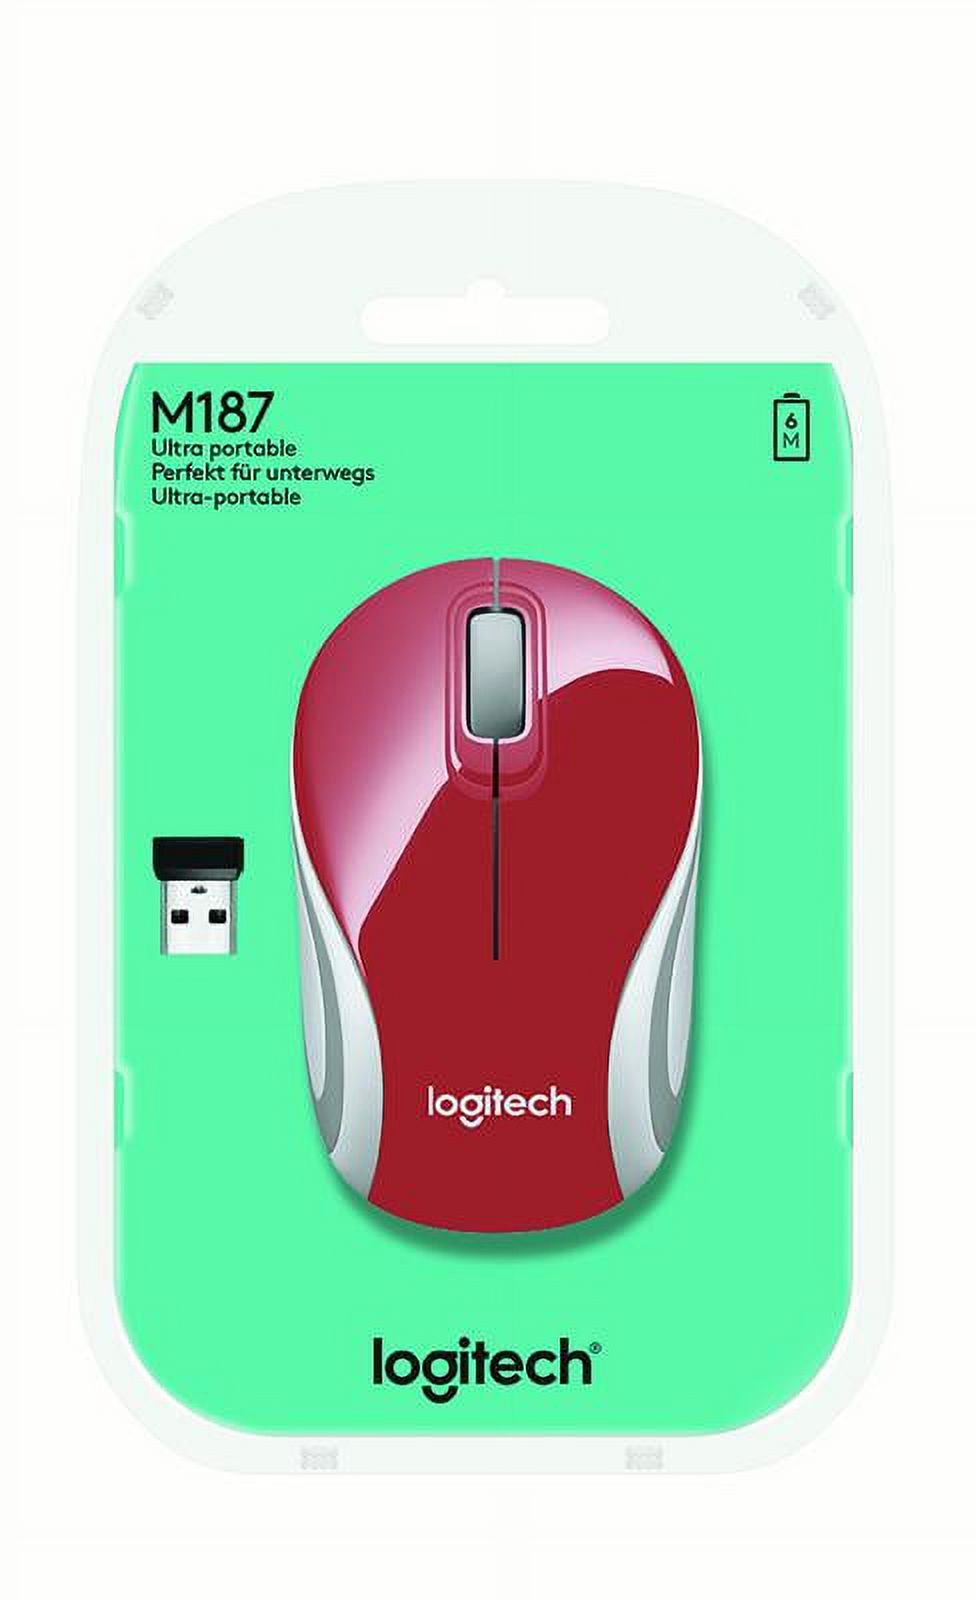 Logitech M187 Wireless Mini Mouse - Red - image 4 of 4